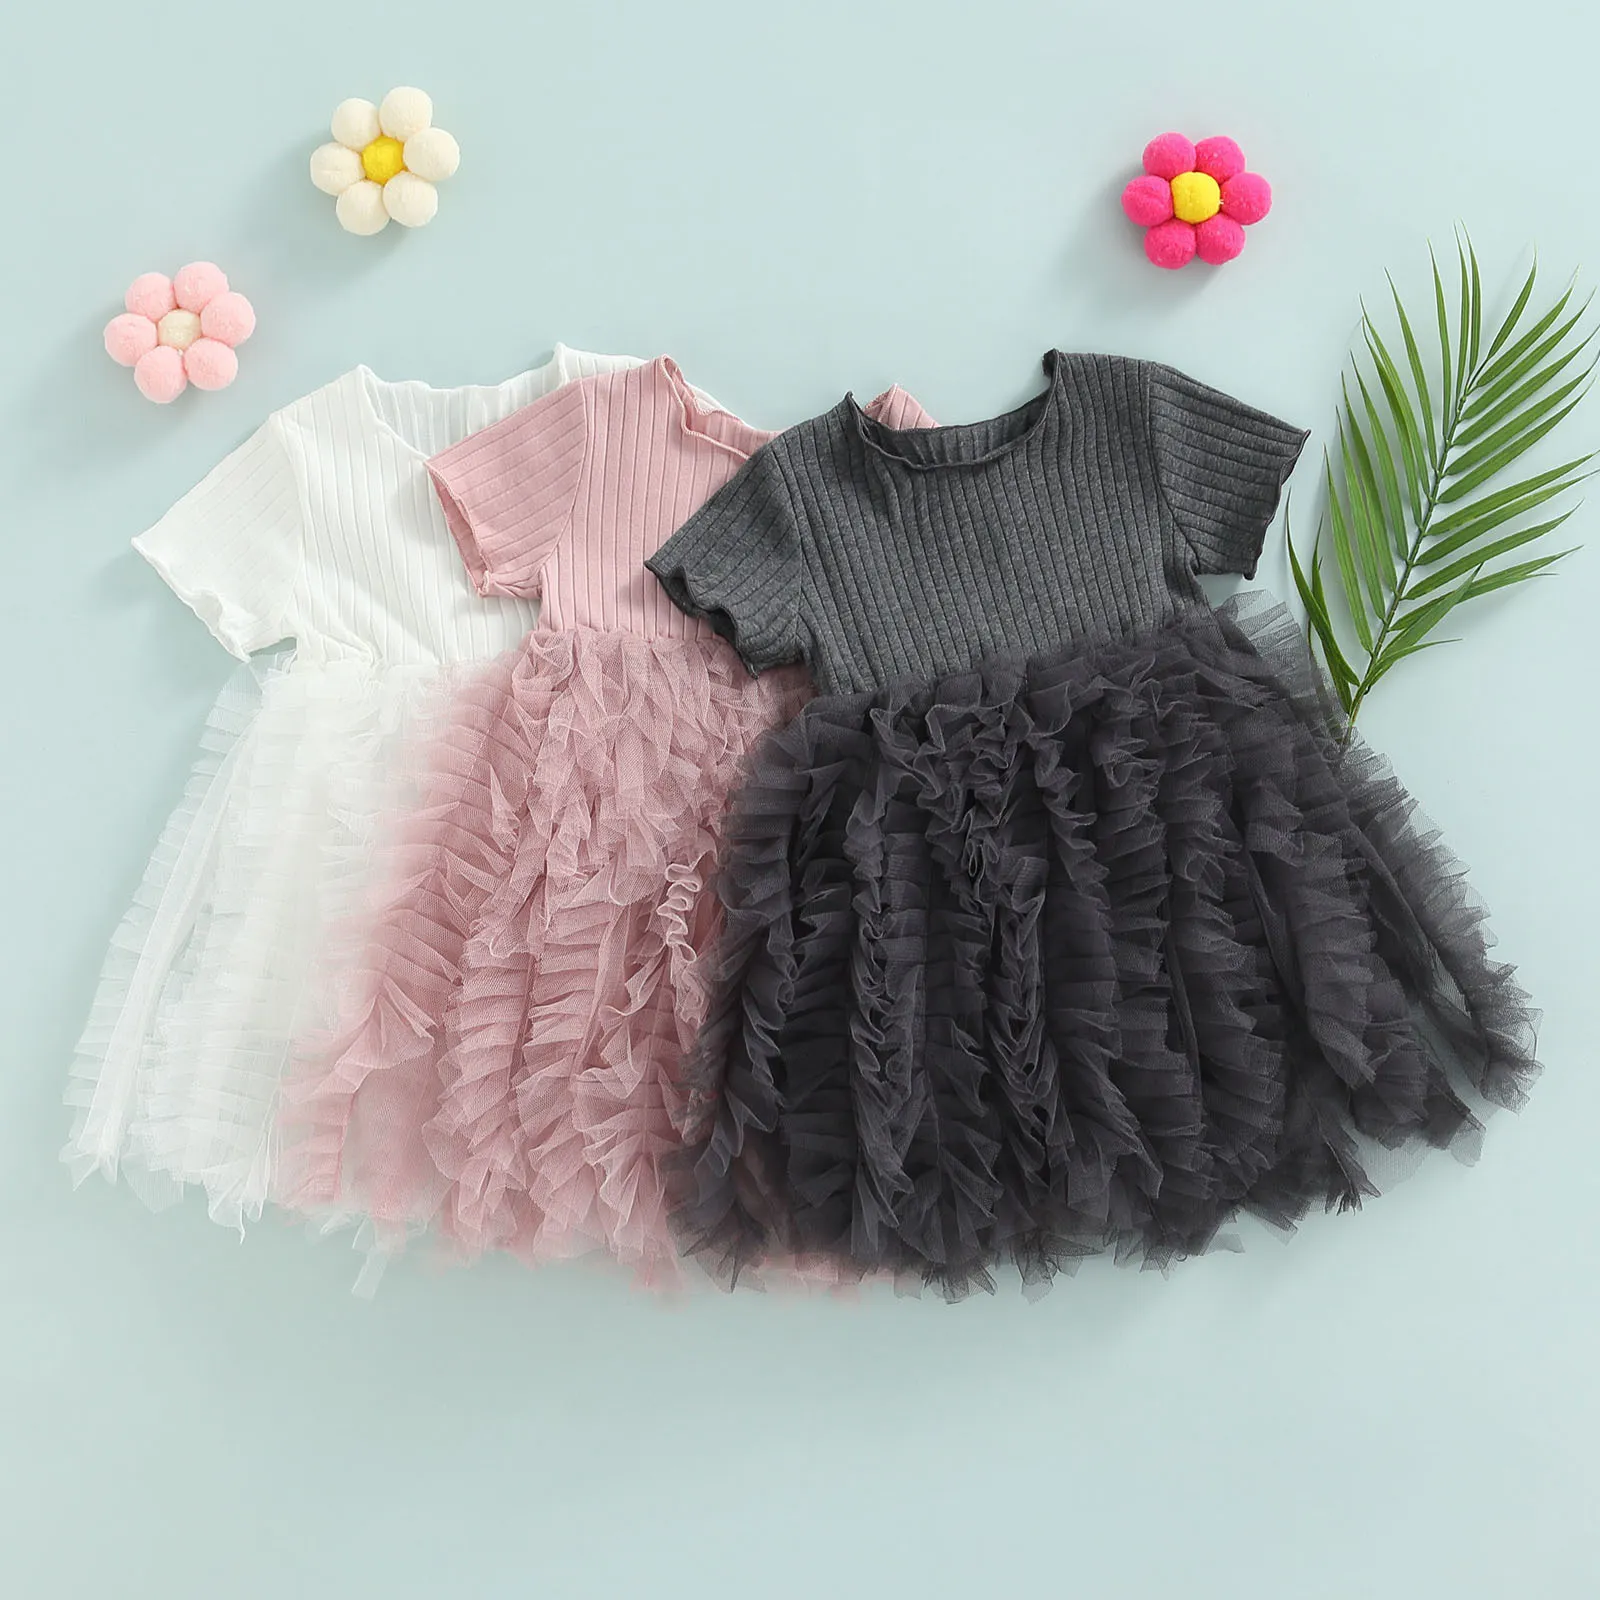 Girls Dresses ma baby 16Y Toddler Kid Dress Tulle Tutu Party Wedding Birthday For Children Clothing Costumes D01 230217